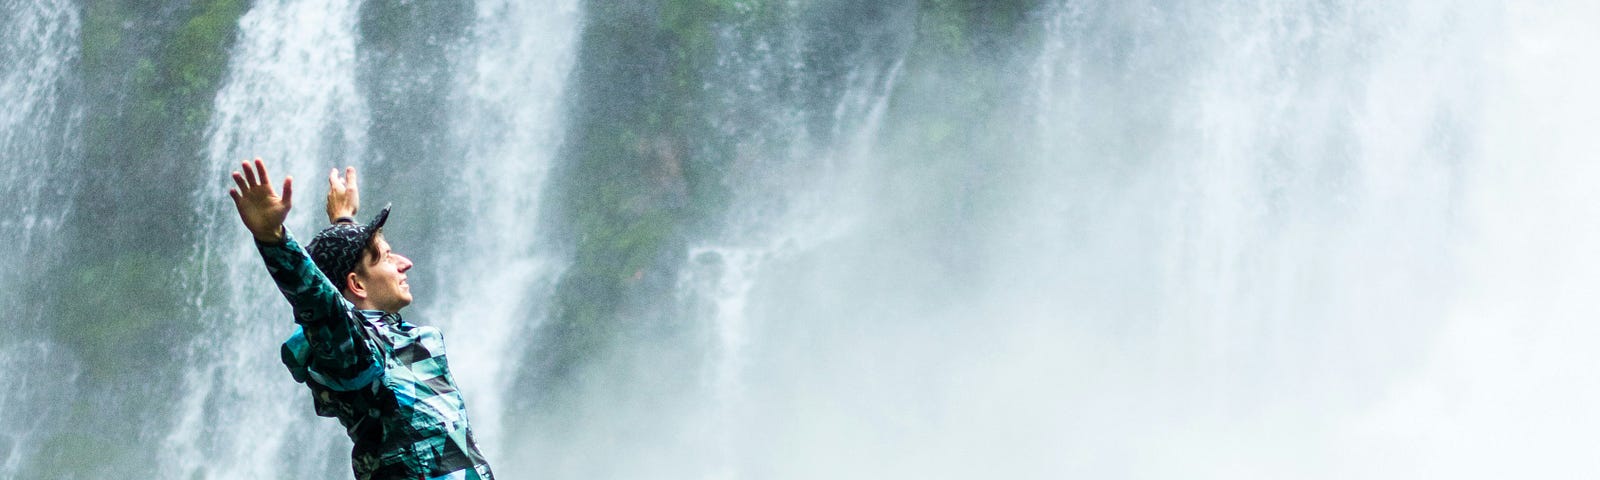 Male standing at the side of a waterfall wearing a cap, sporty clothes, arms up in the air, he looks happy.